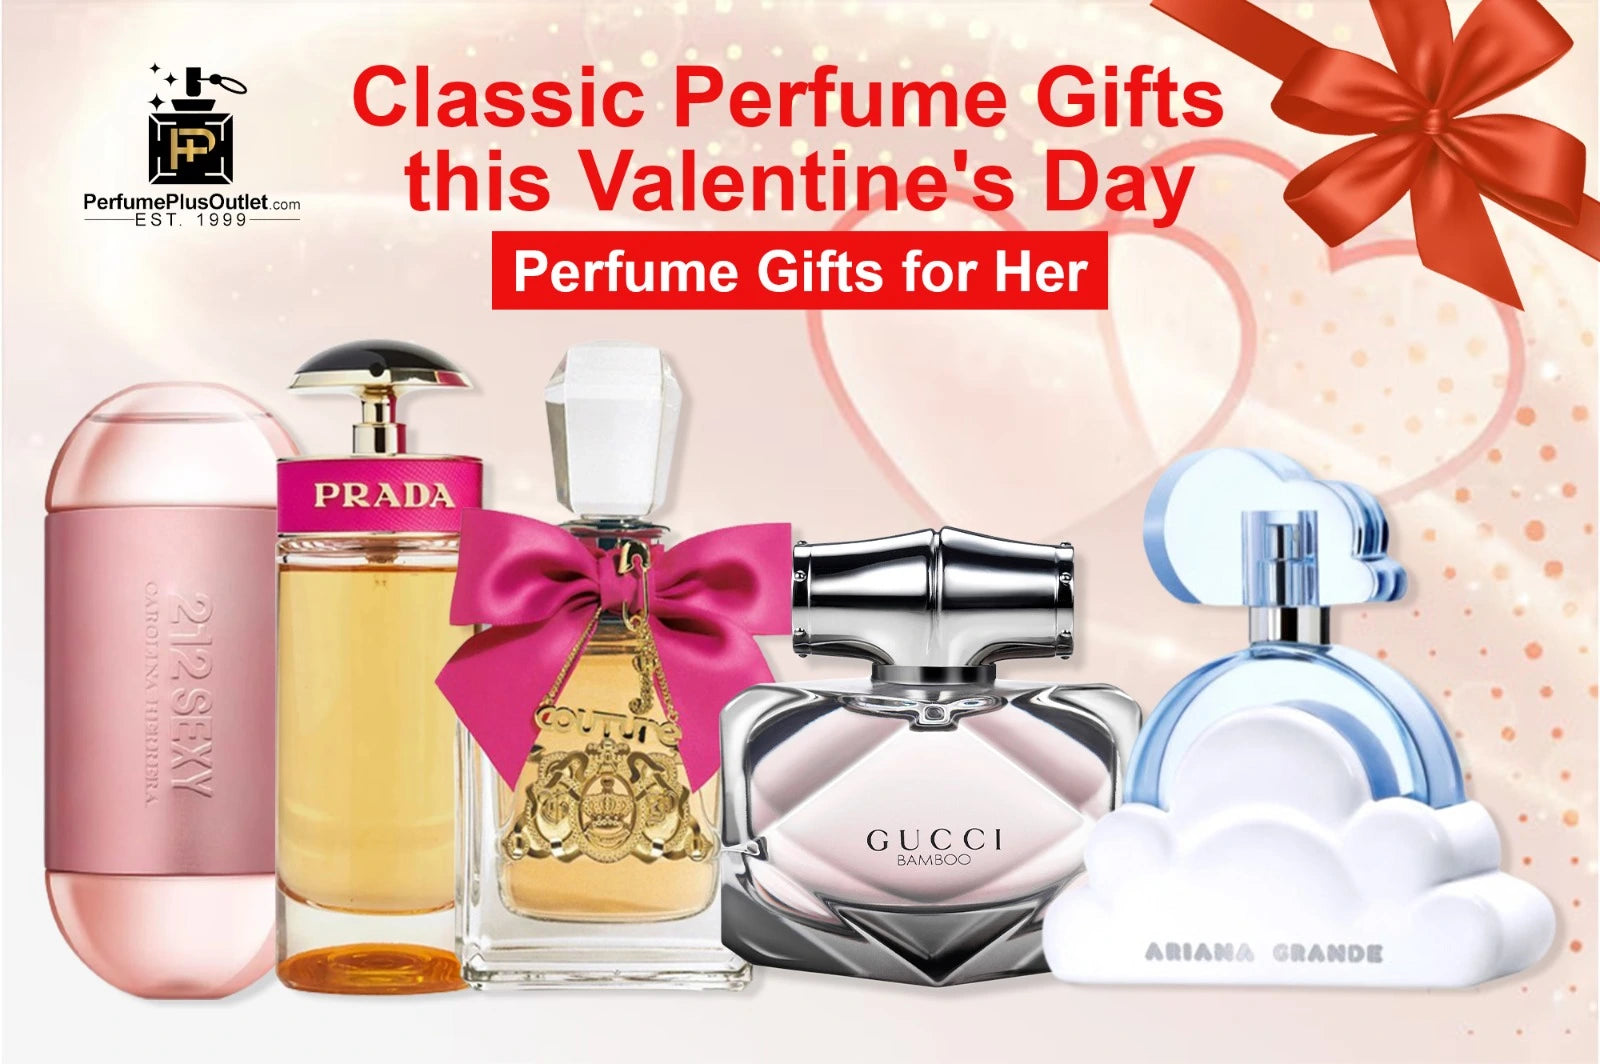 10 Classic Perfume Gifts this Valentine's Day